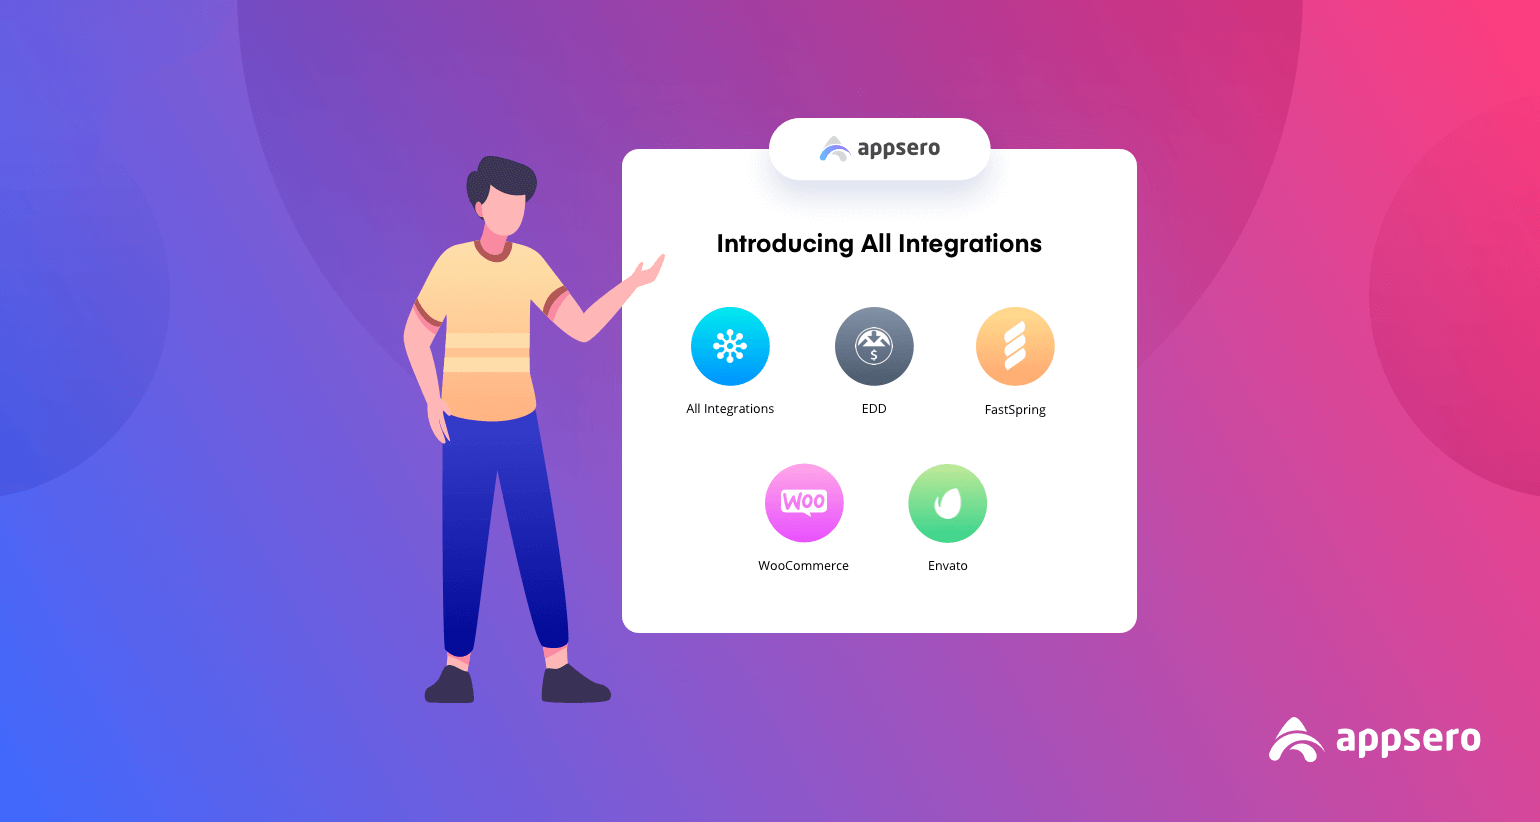 A Detailed Introduction to Appsero Integrations